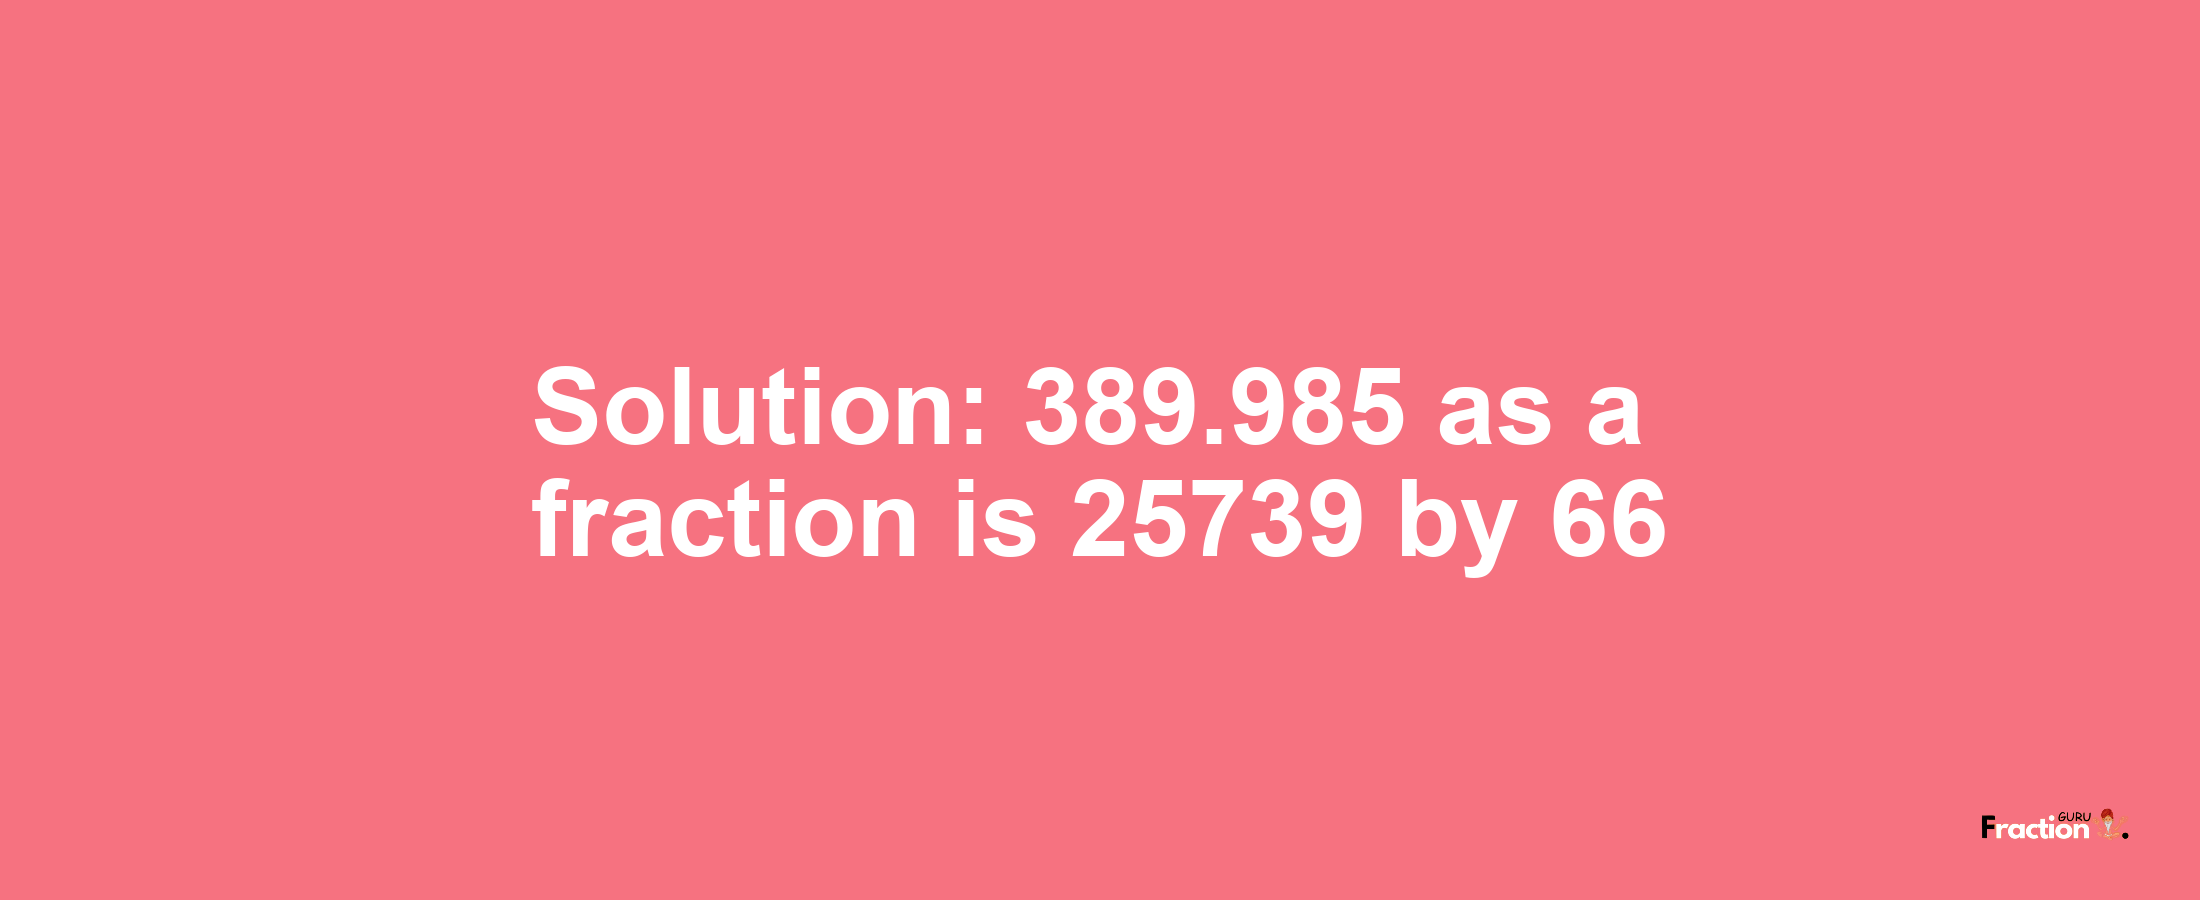 Solution:389.985 as a fraction is 25739/66